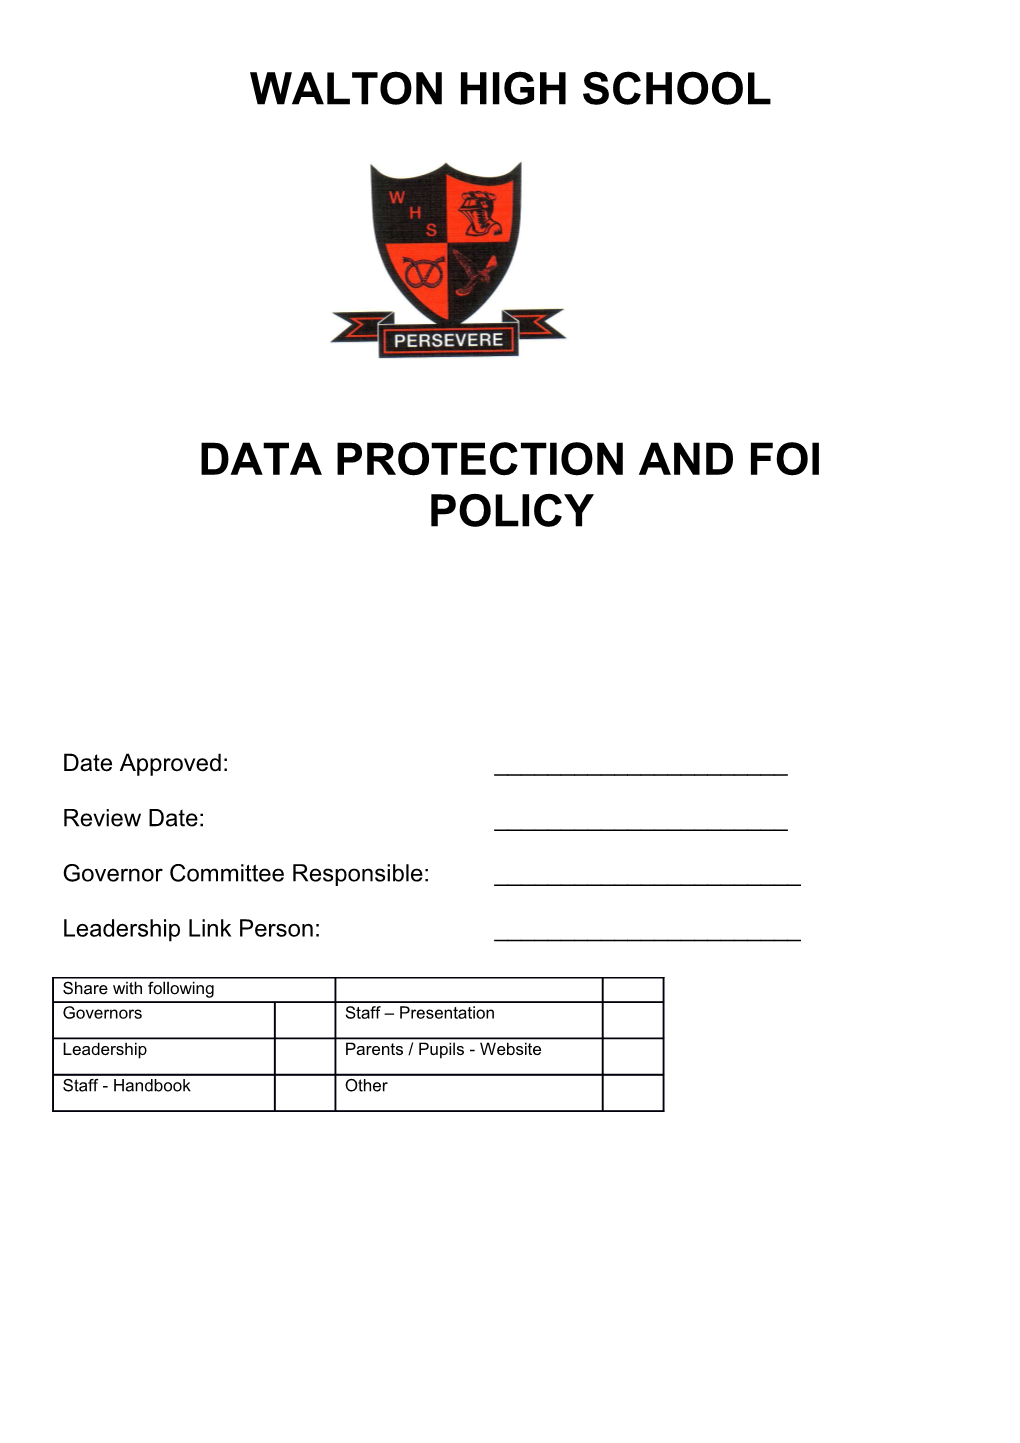 Data Protection and Foi